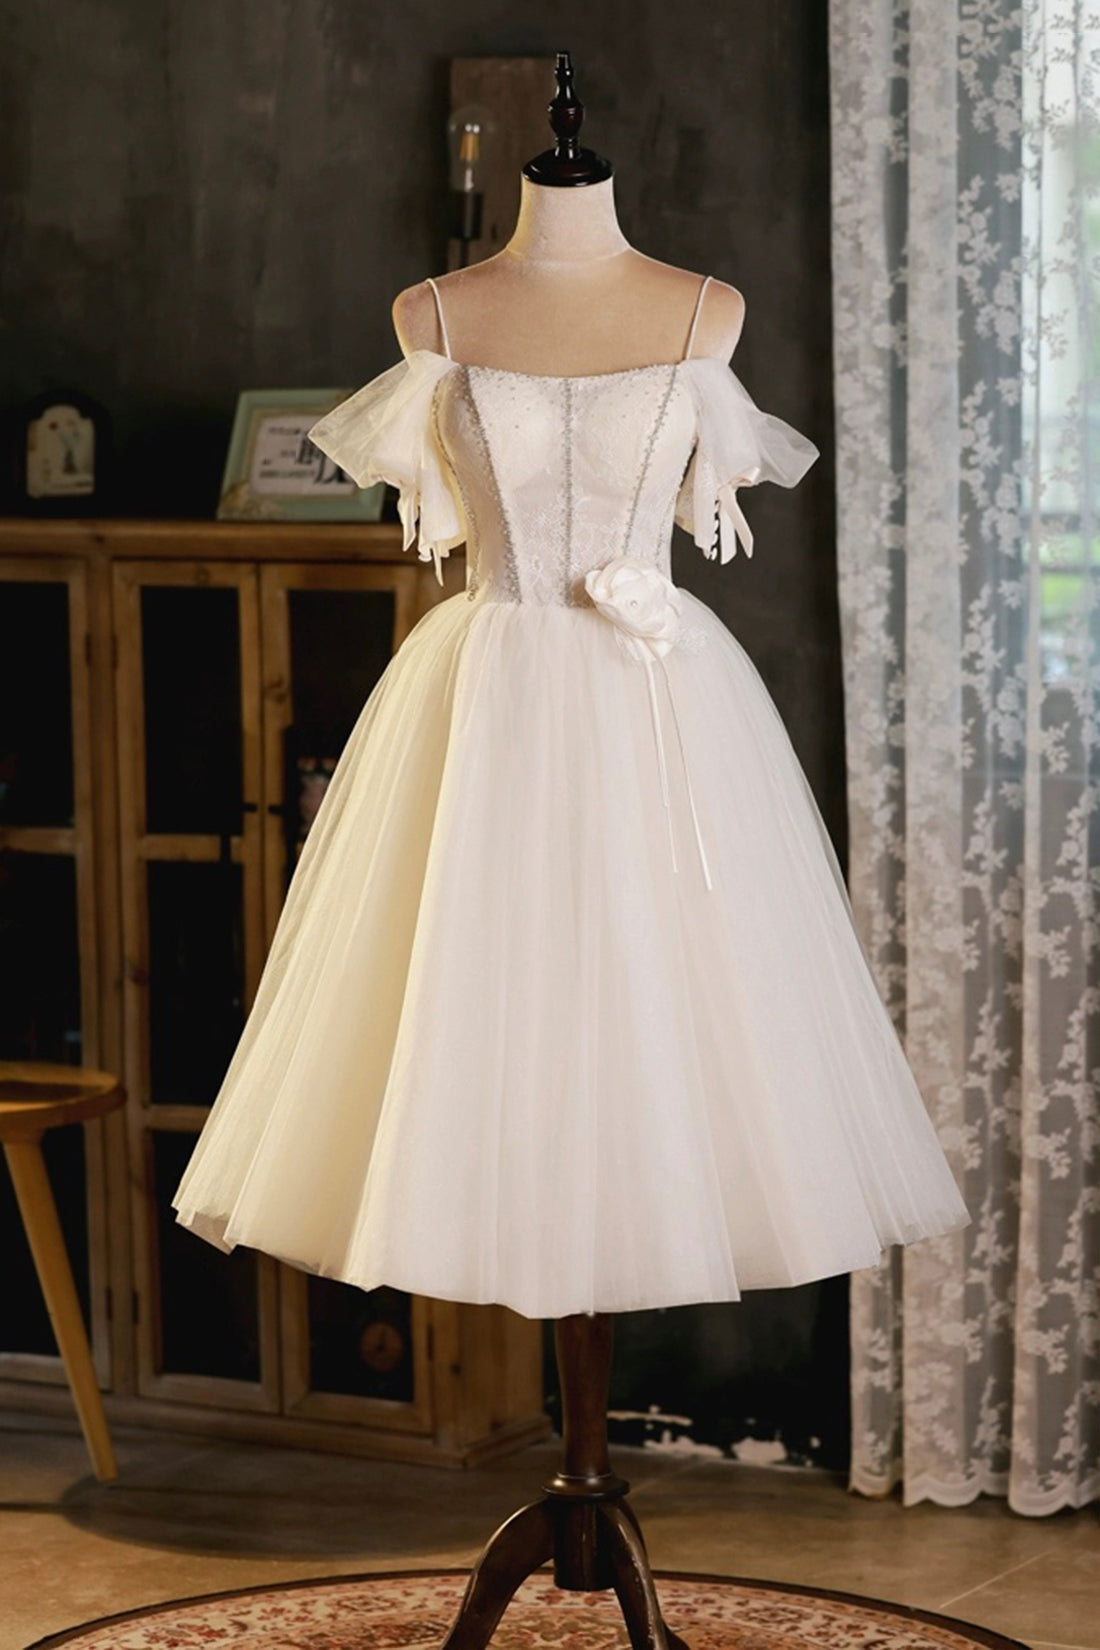 Lovely Spaghetti Strap Tulle Short Prom Dress, Light Champagne A-Line Evening Party Dress